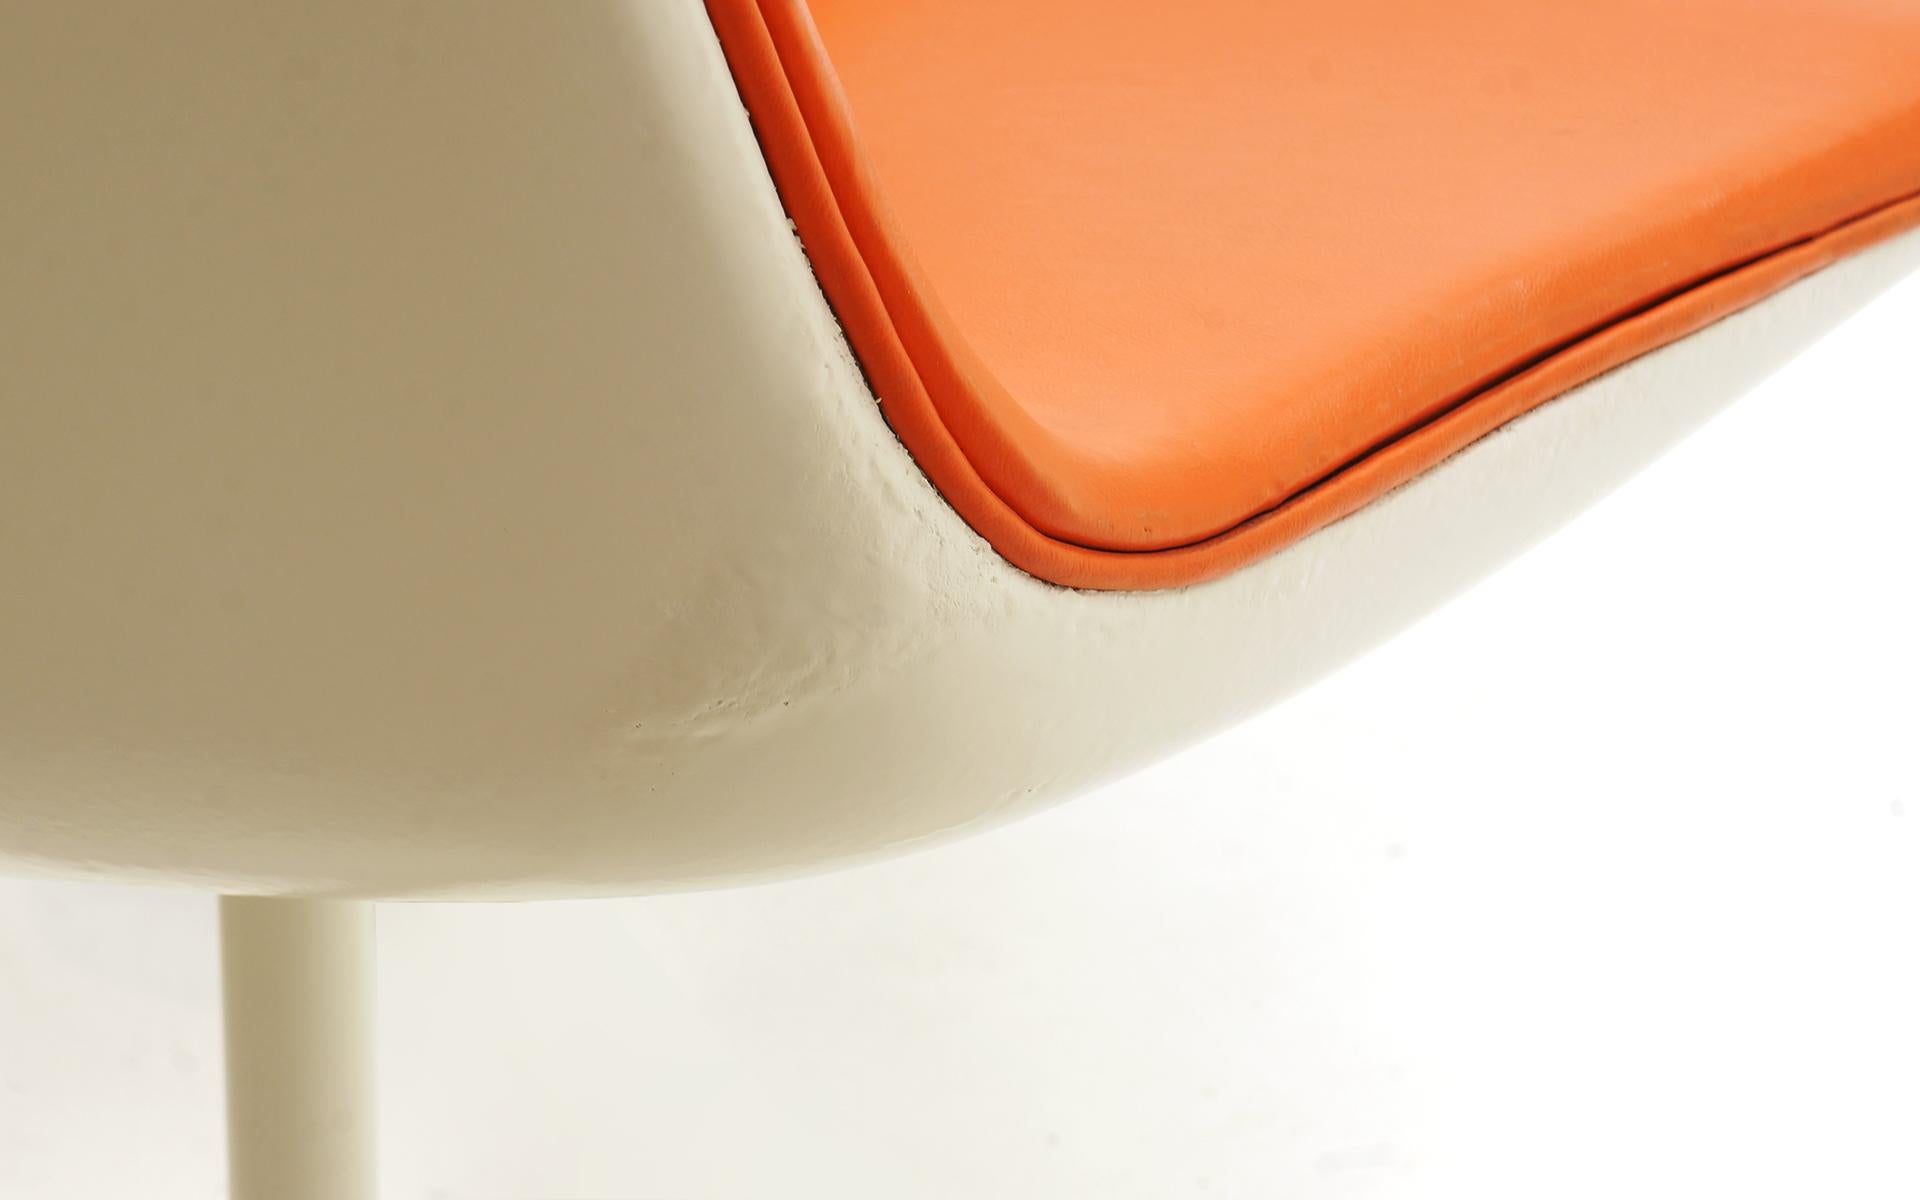 Fiberglass Eight Dining Chairs by Richard Schultz for Knoll. White Frames, Red Orange Seats